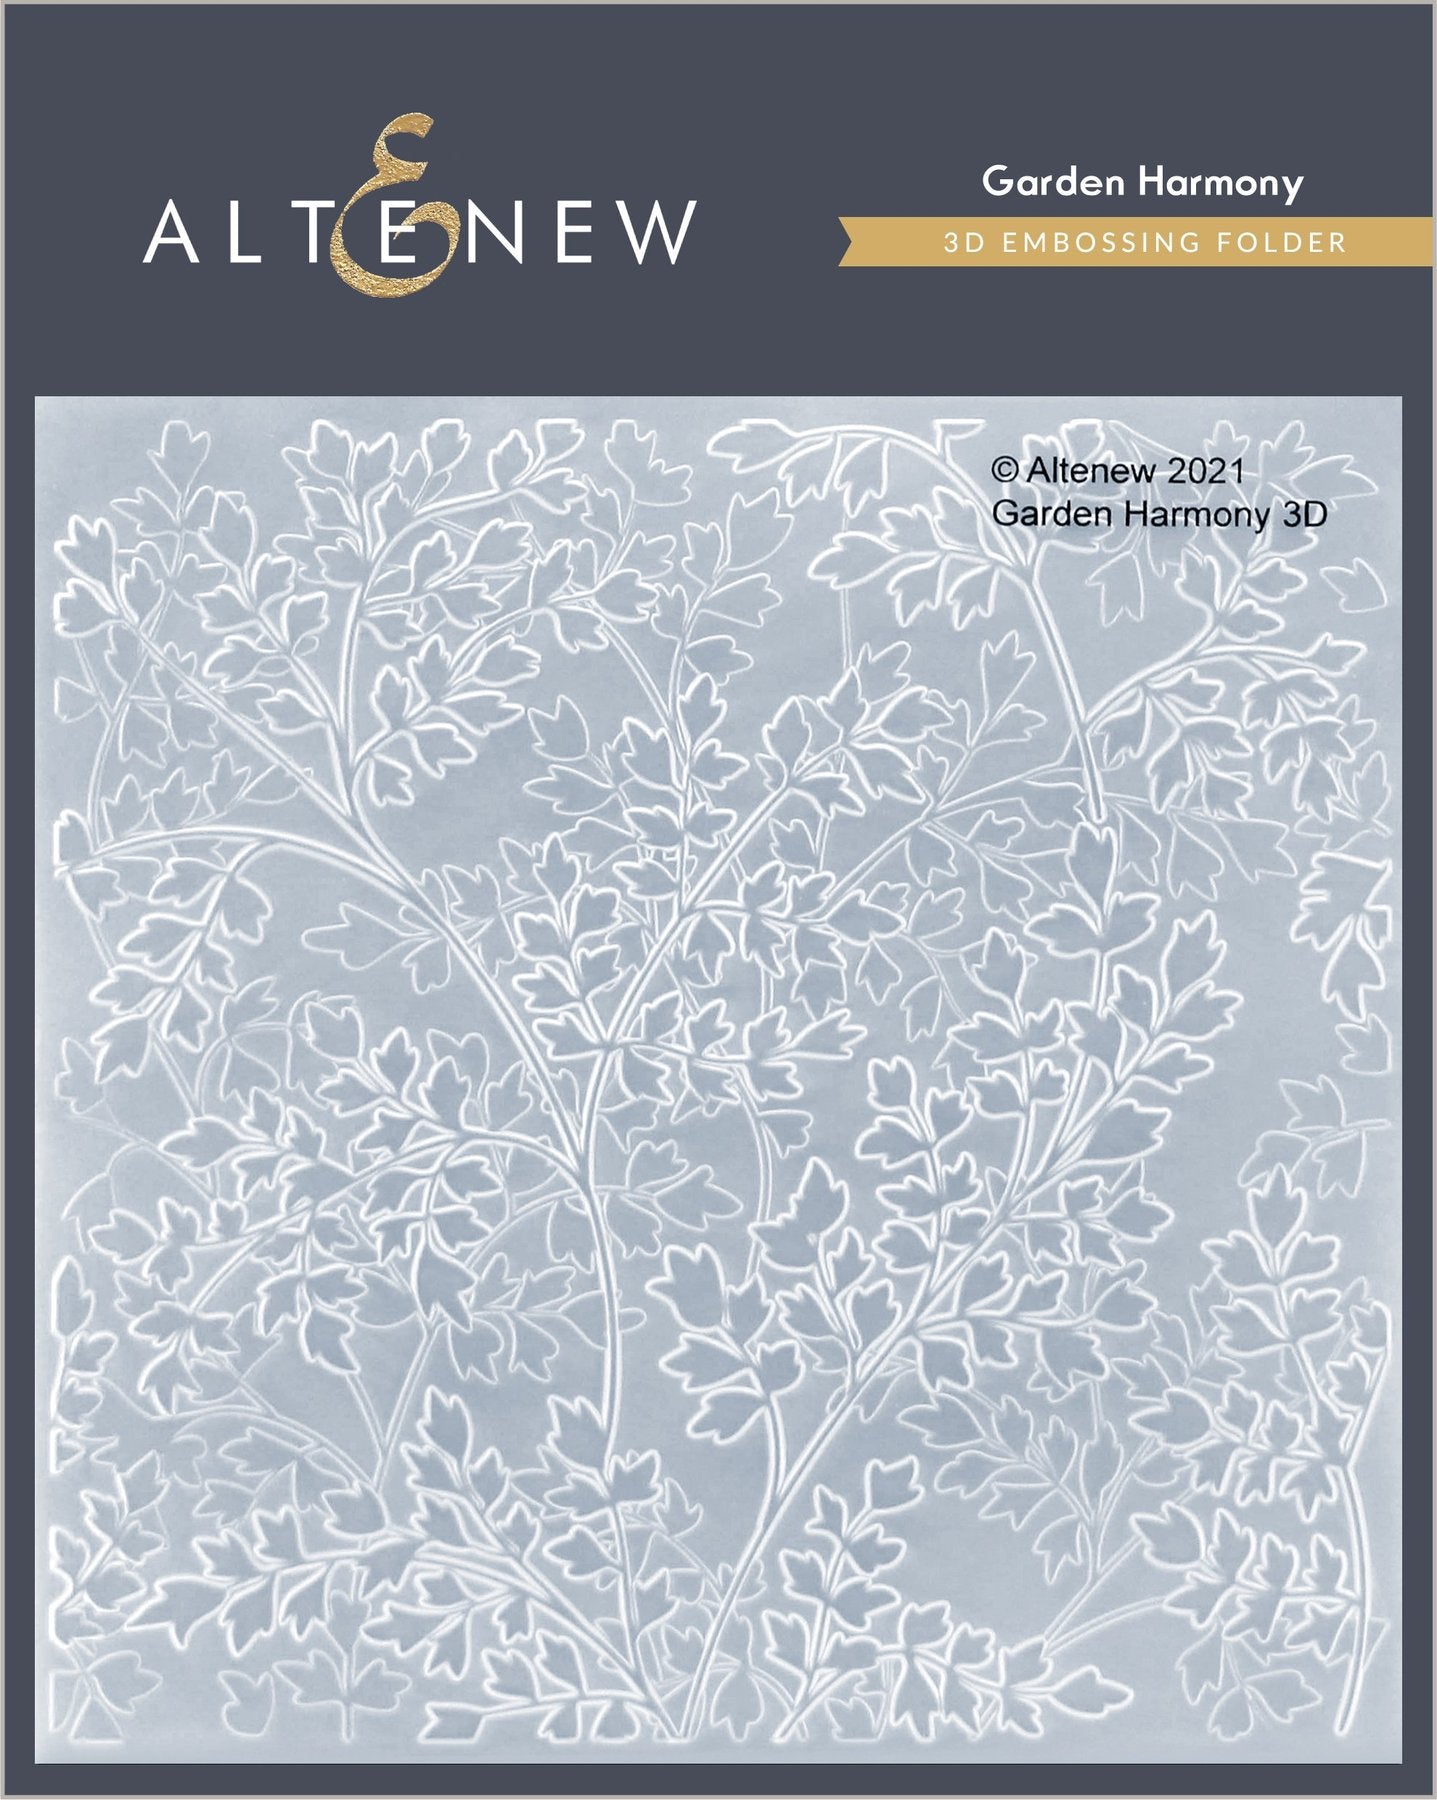 Altenew - Garden Harmony 3D Embossing Folder- sold out